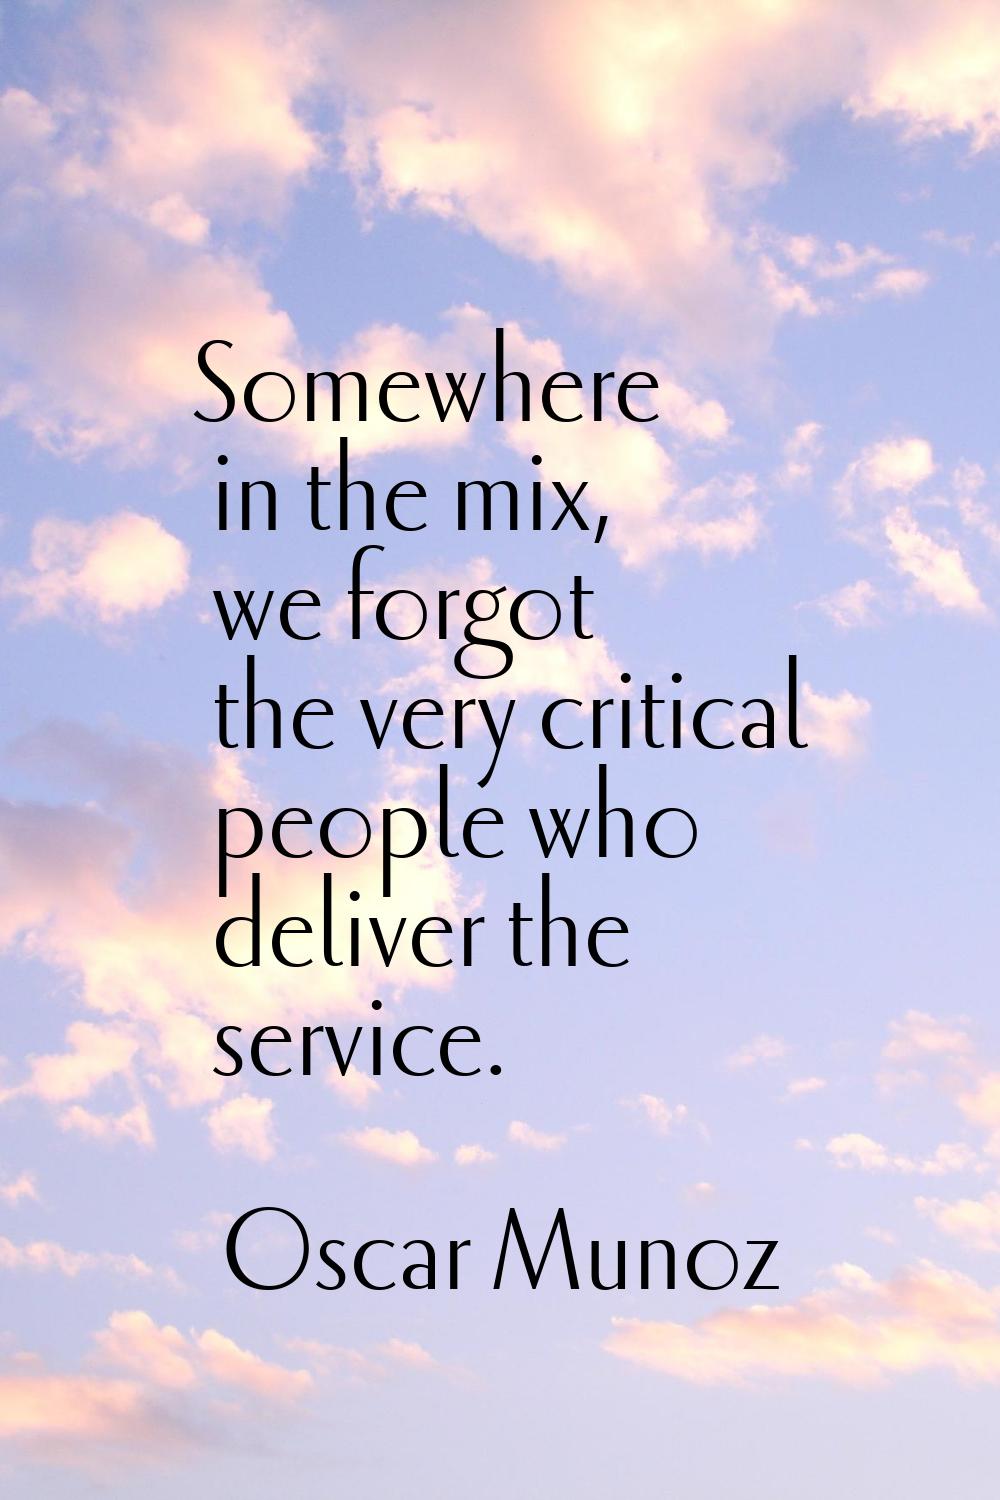 Somewhere in the mix, we forgot the very critical people who deliver the service.